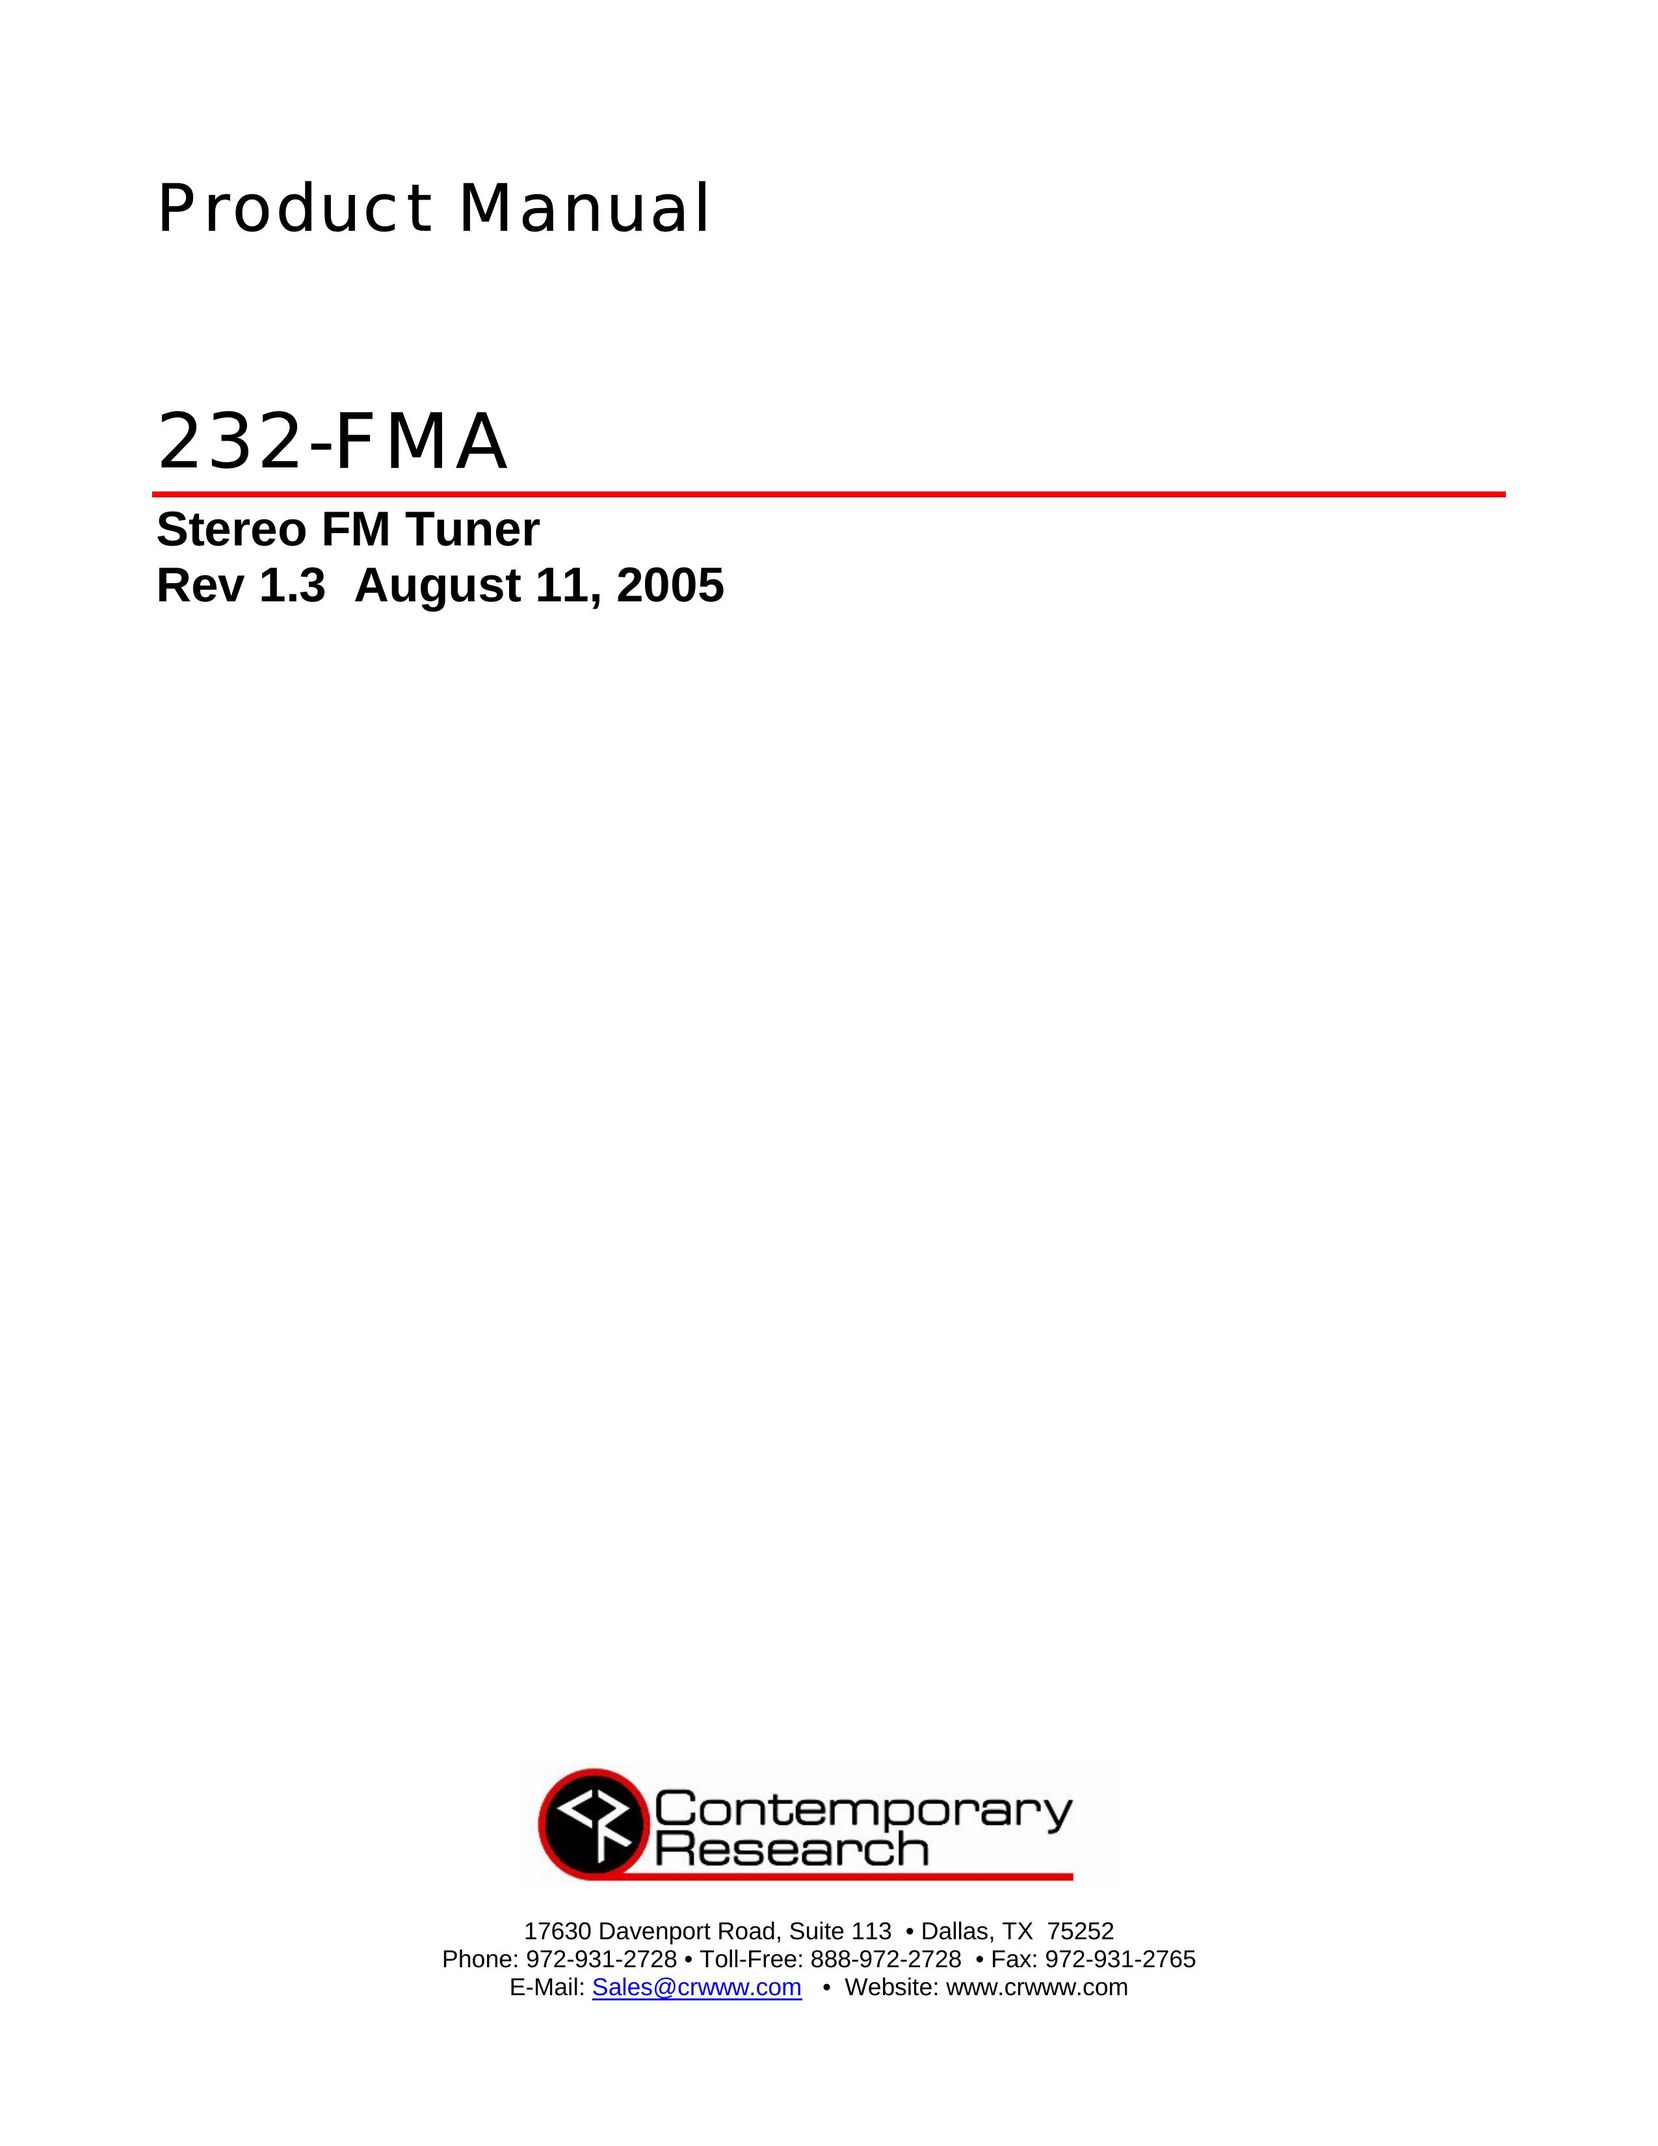 Contemporary Research 232-FMA Car Stereo System User Manual